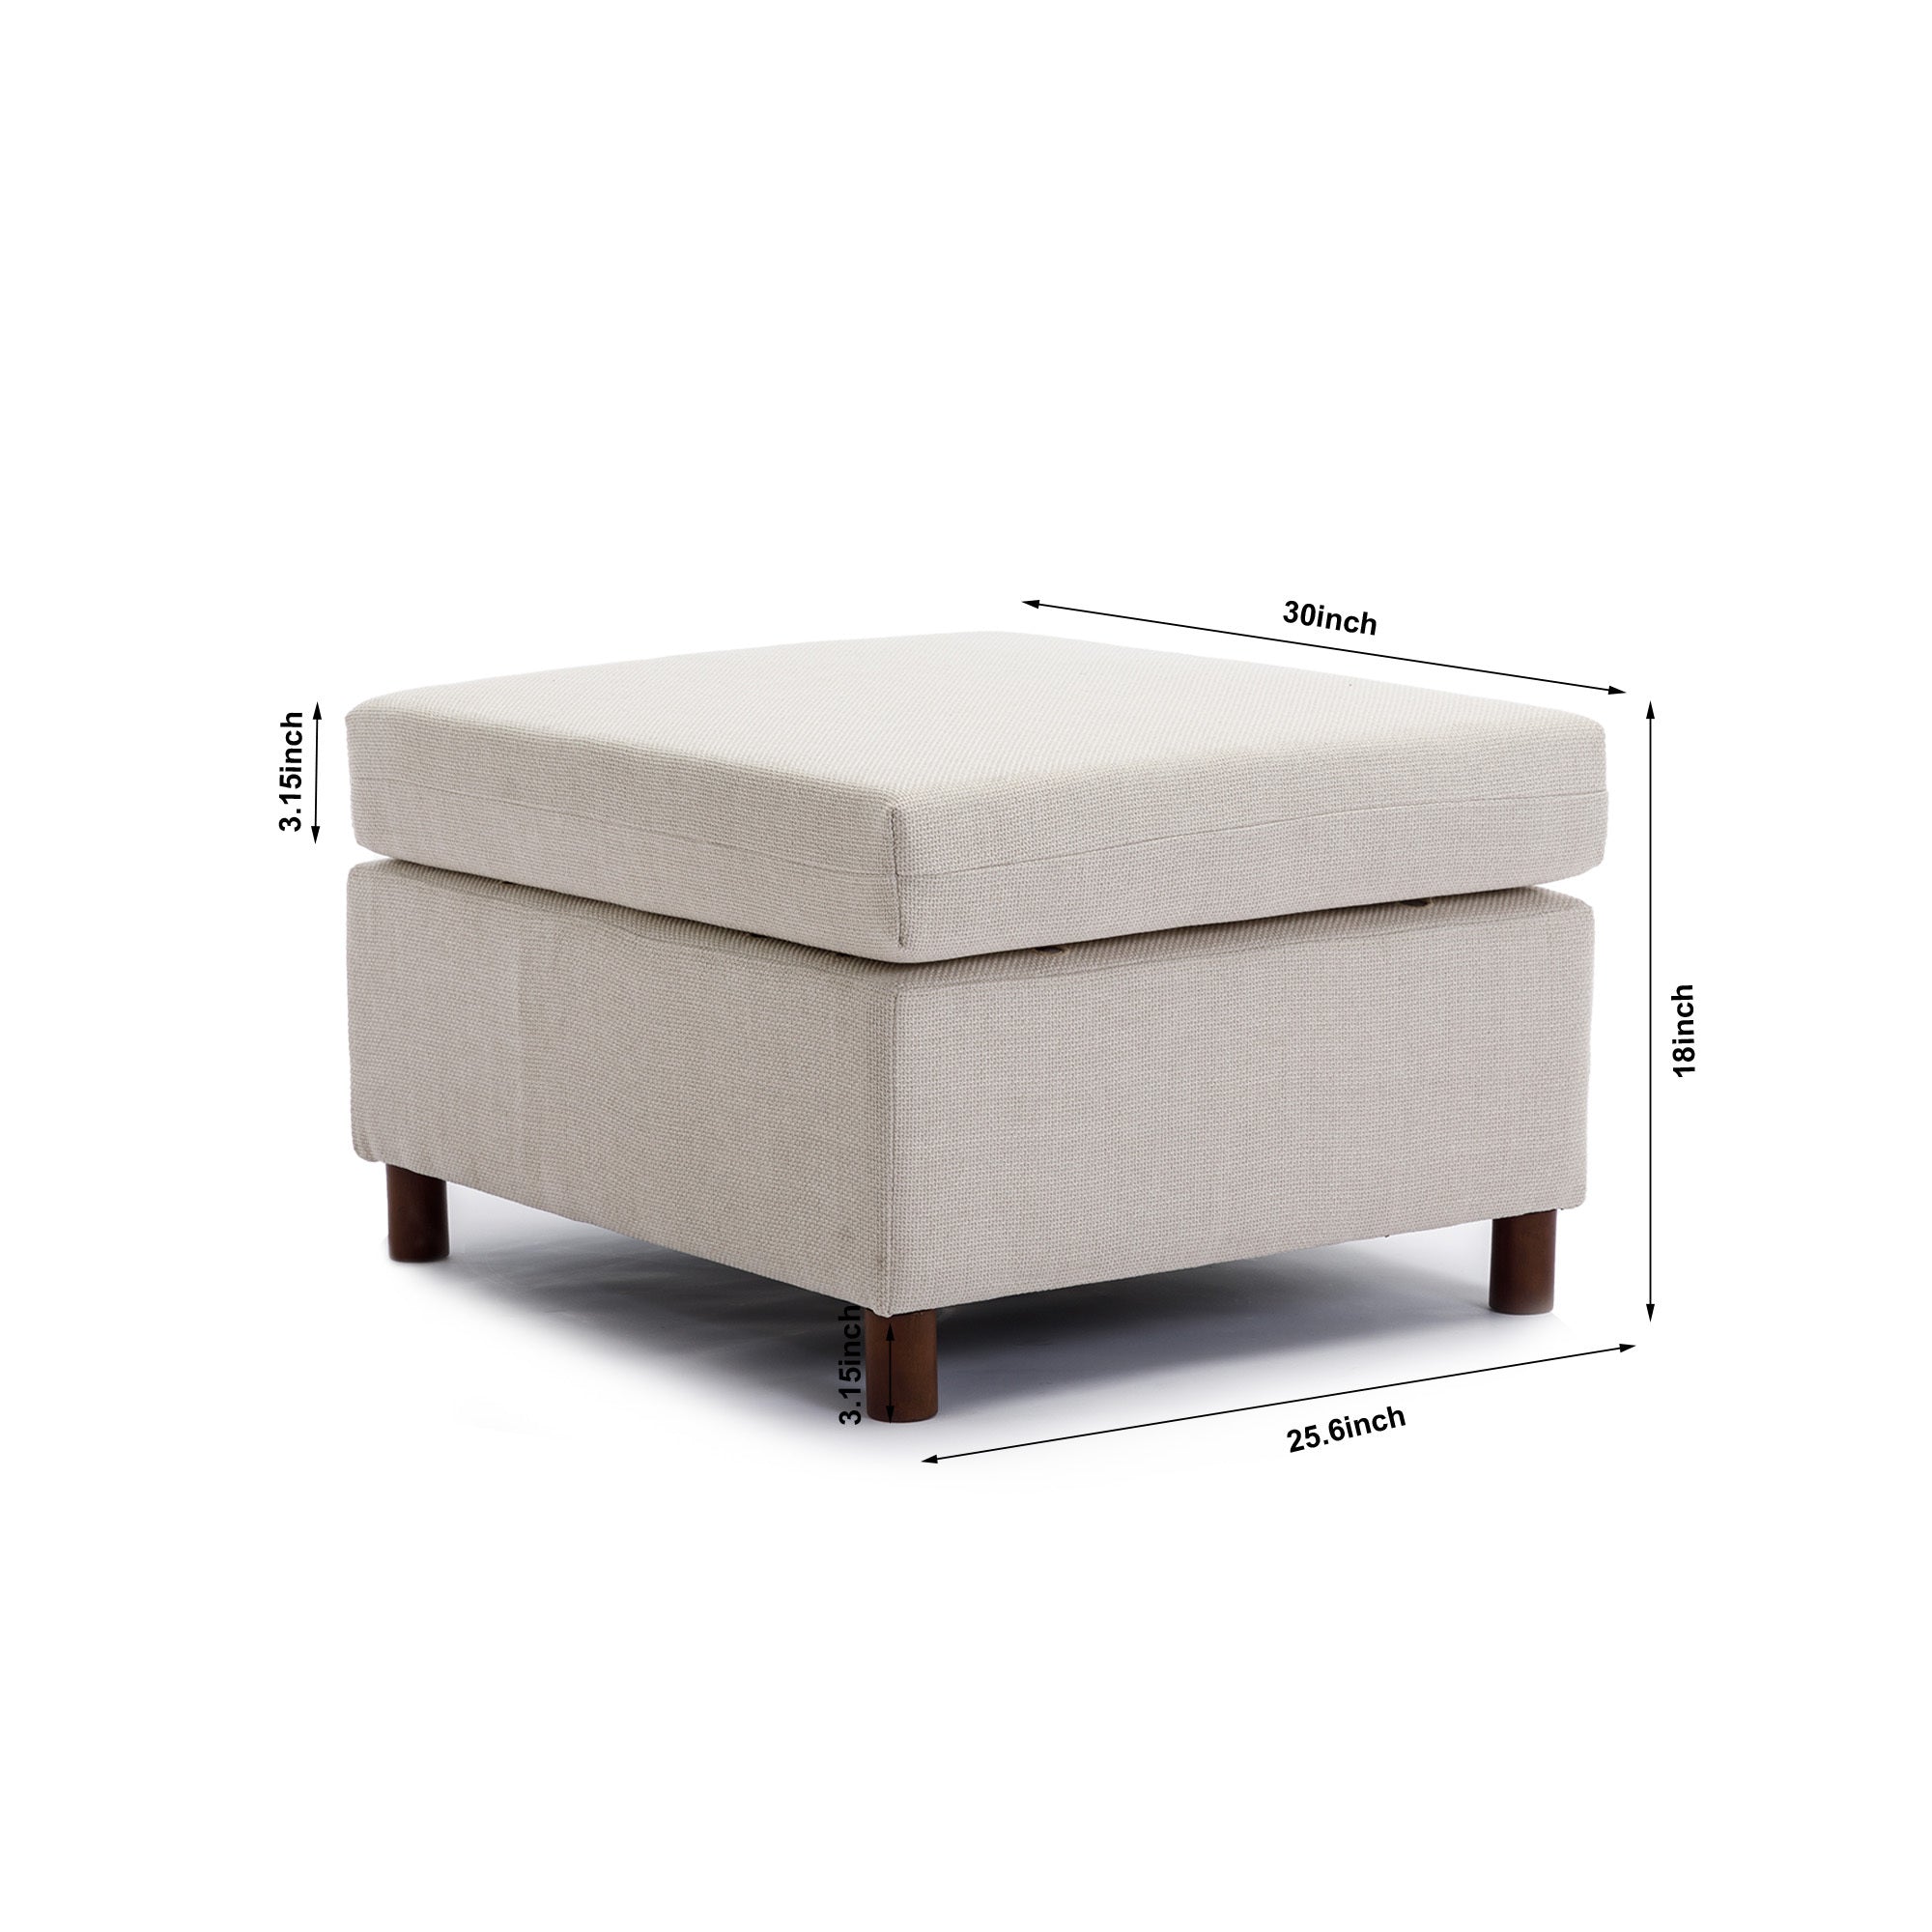 4 Seat Module Sectional Sofa Couch With 1 Ottoman for living room,Seat Cushion and Back Cushion Non-Removable and Non-Washable,Cream